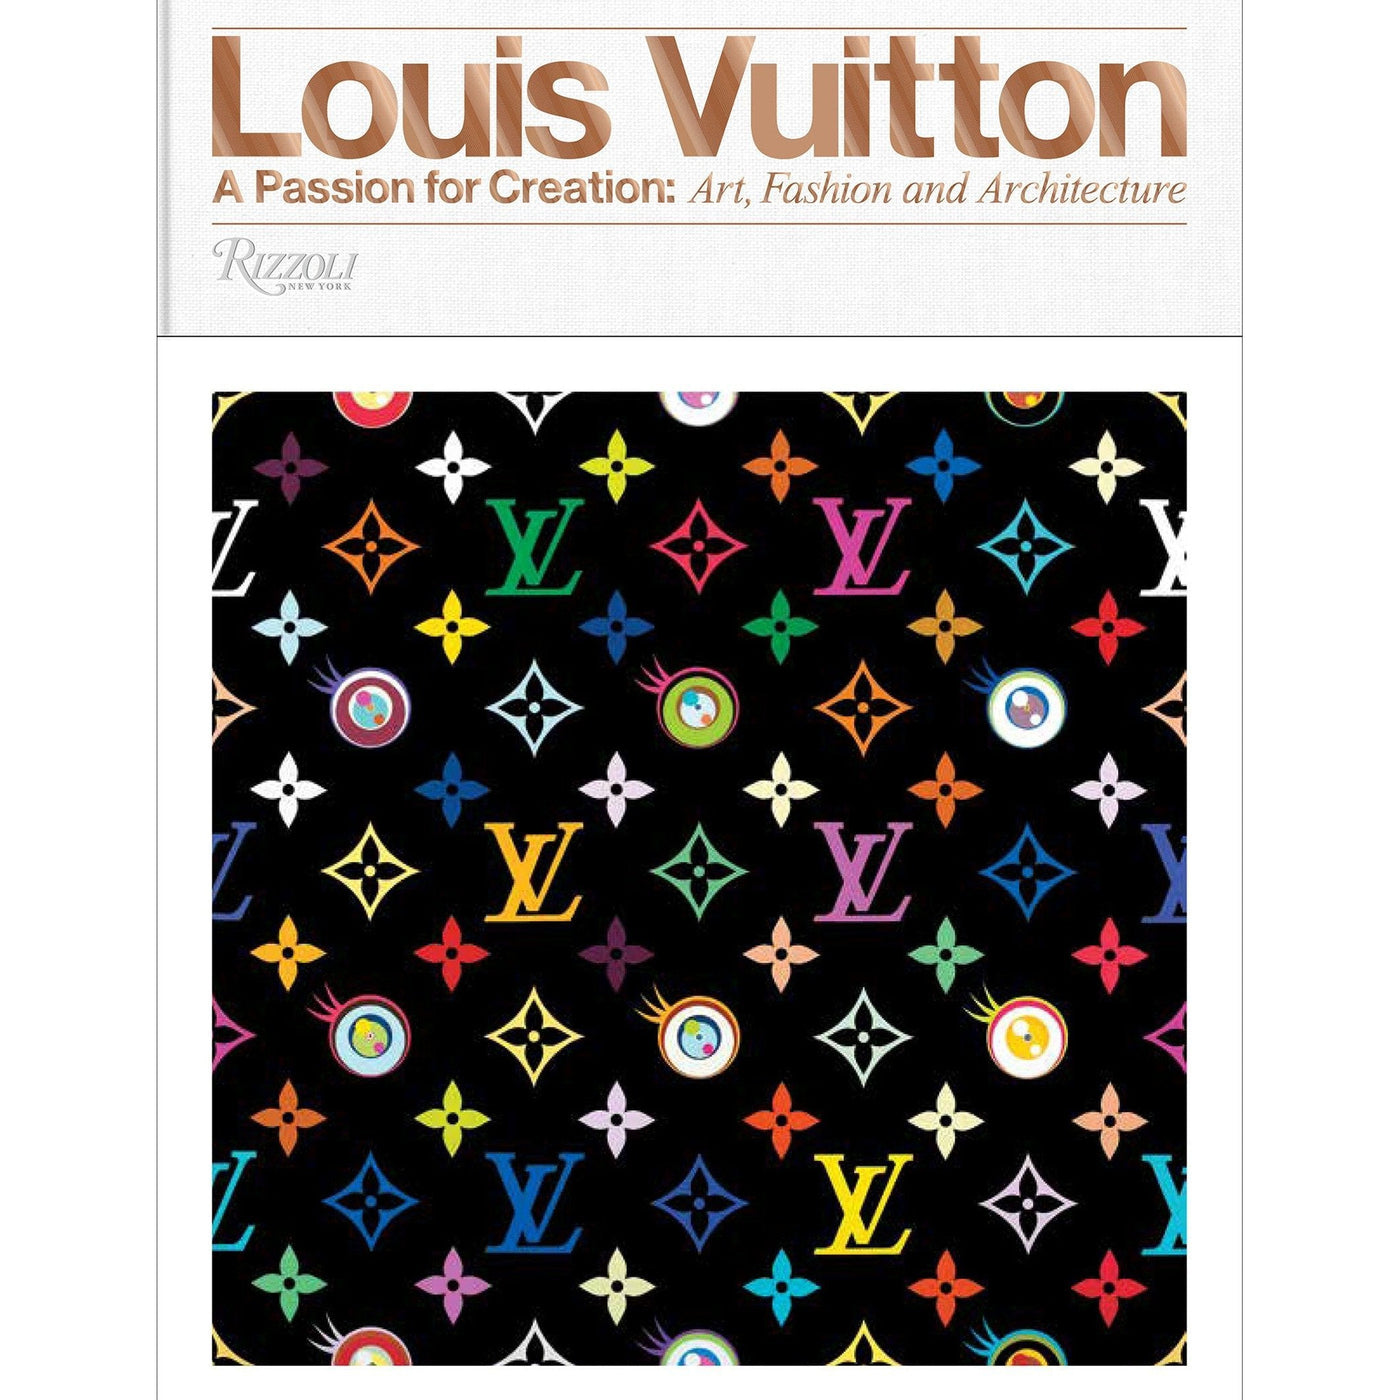 Louis Vuitton: A Passion for Creation